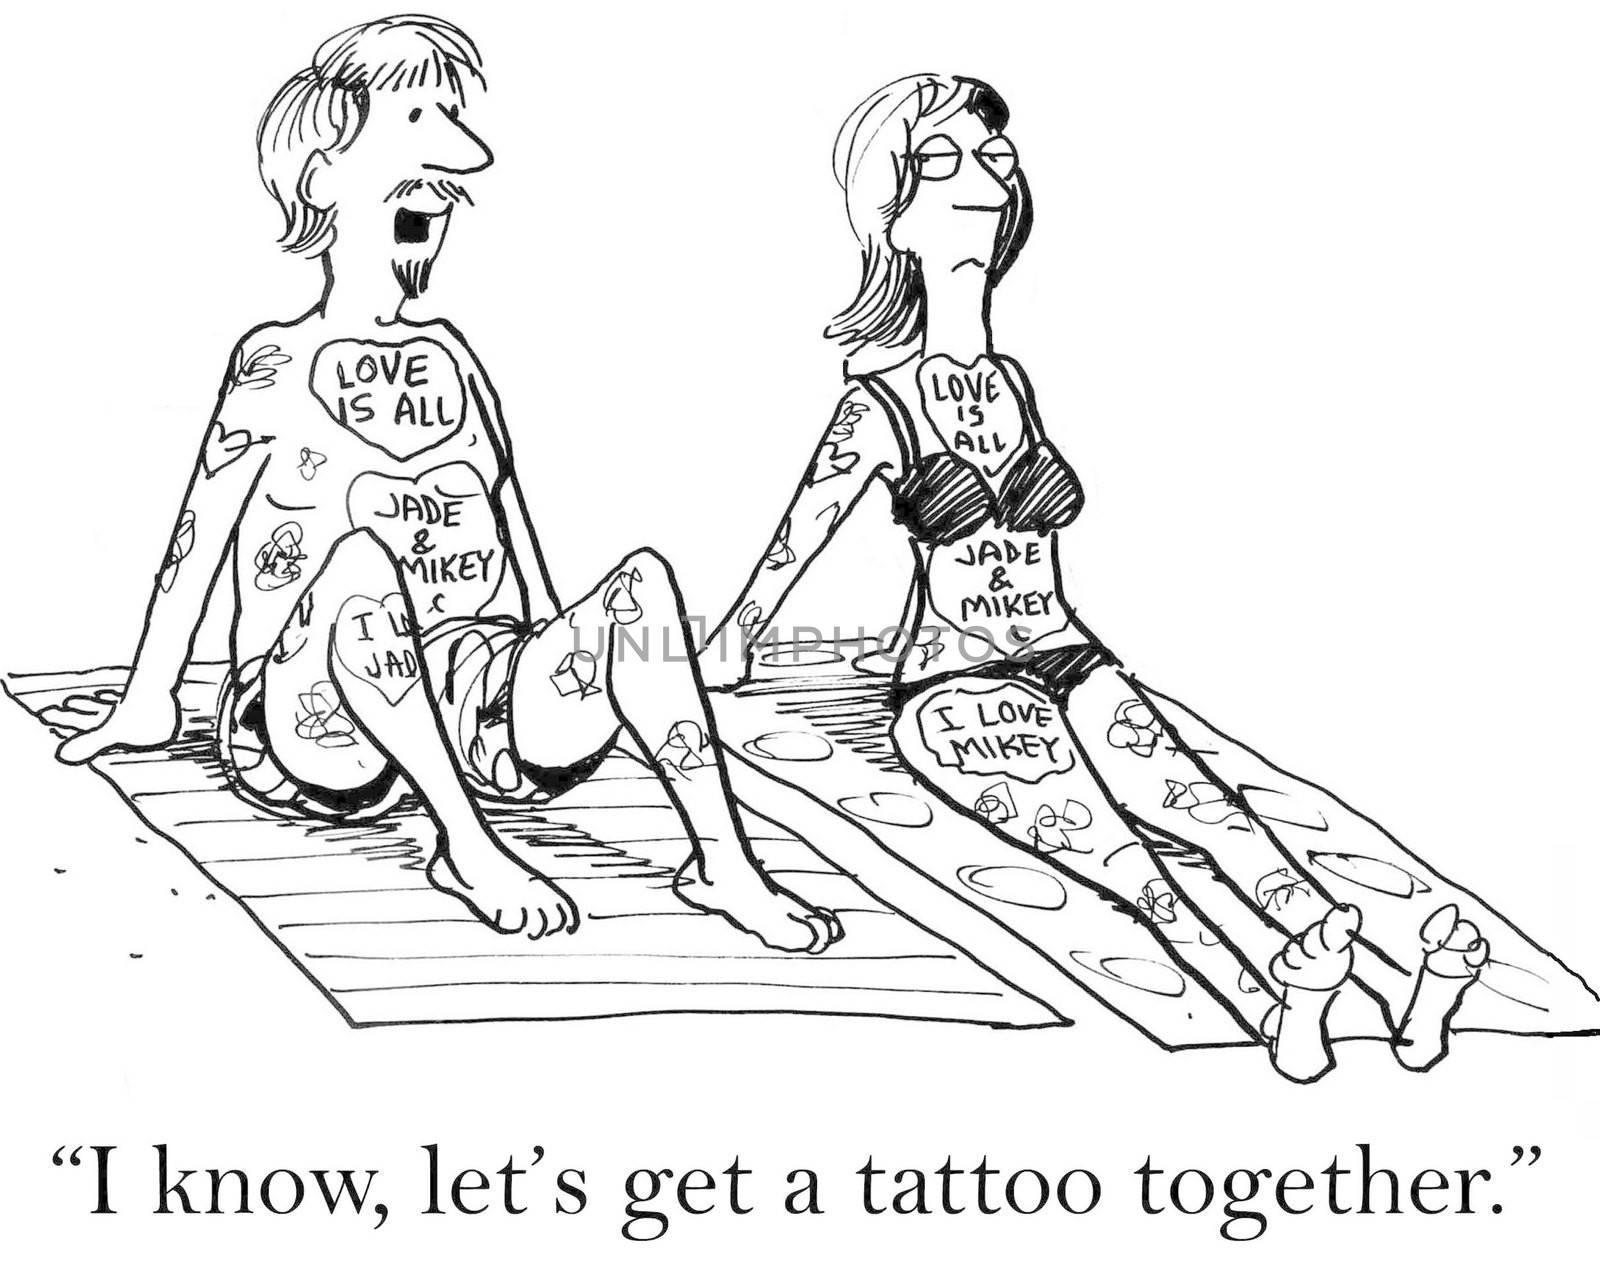 "I know. Let's get a tattoo together."